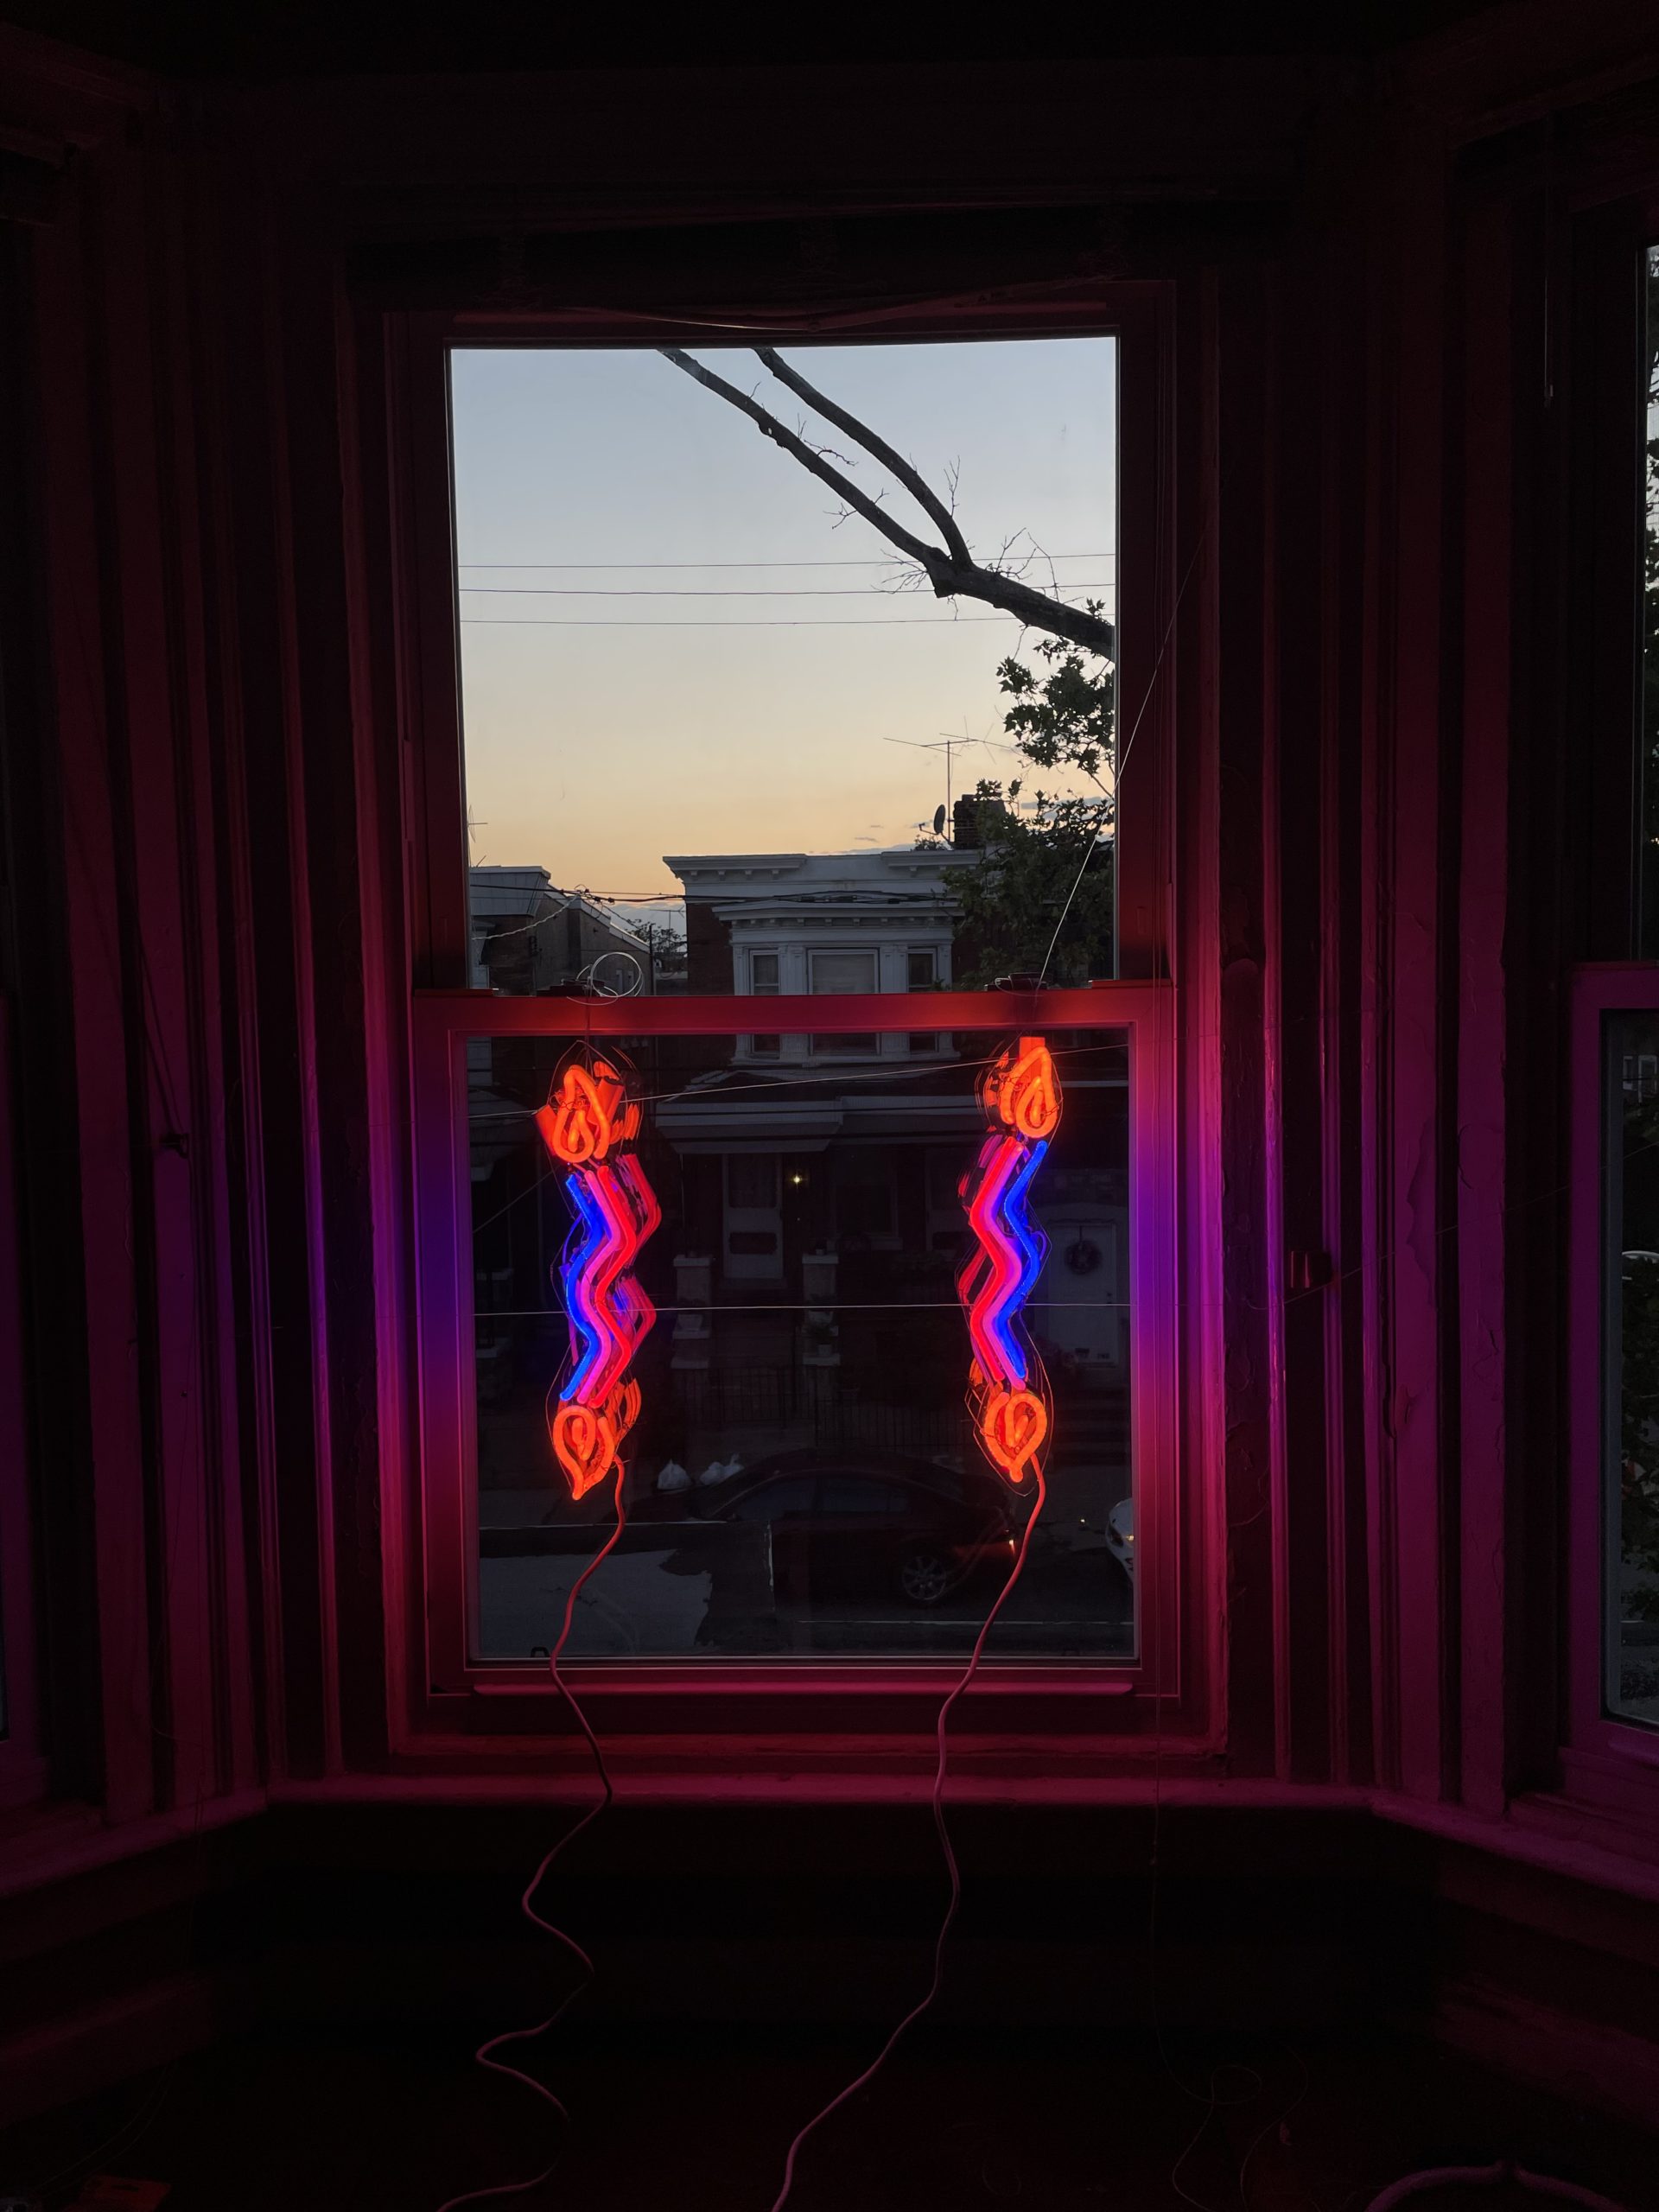 Alissa Eberle, Burning the candle at both ends, neon light sculpture for LIGHT WINDOWS in Philadelphia